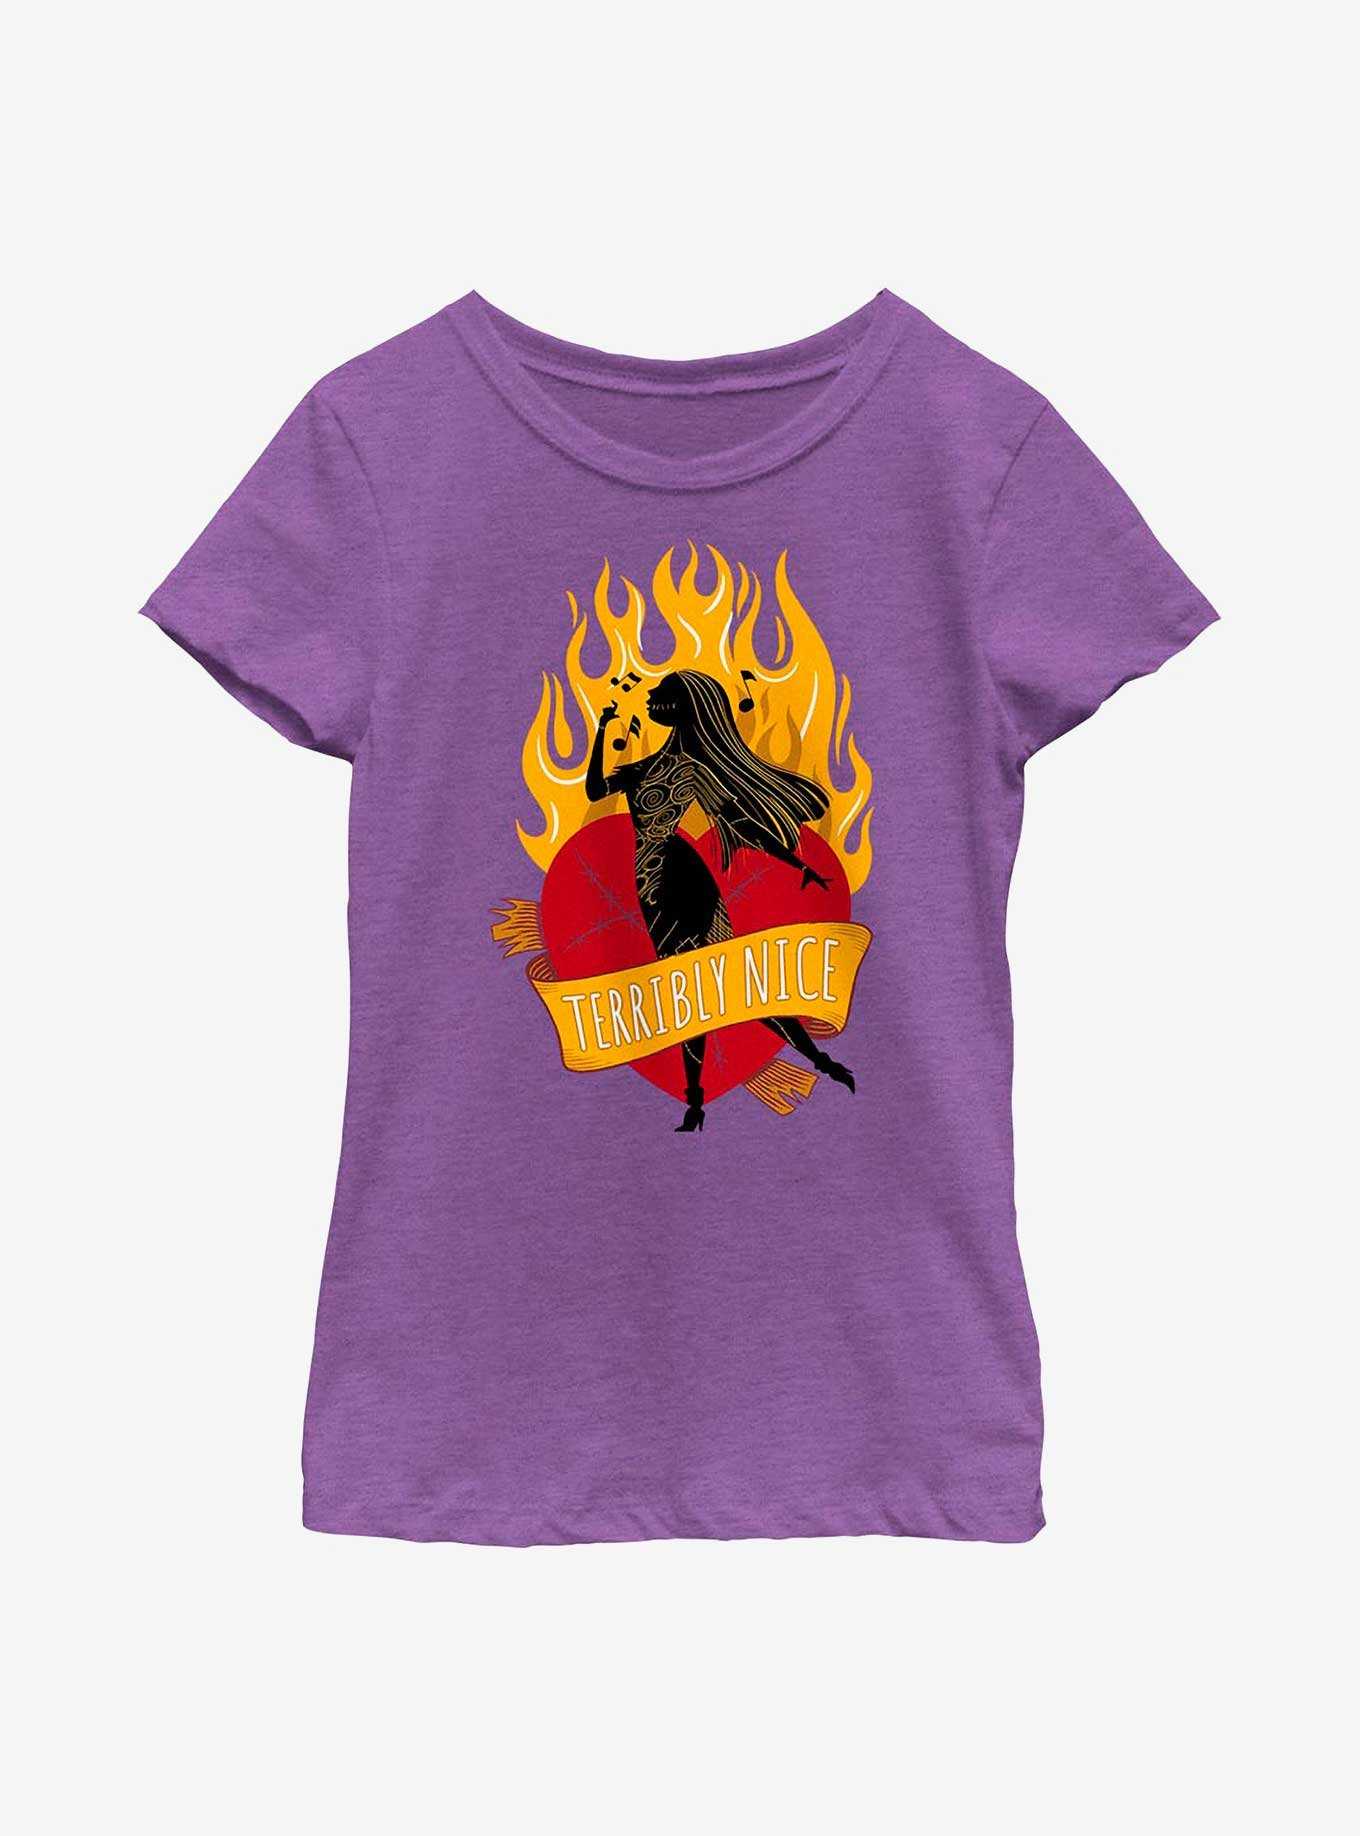 Disney The Nightmare Before Christmas Terribly Nice Youth Girls T-Shirt, , hi-res